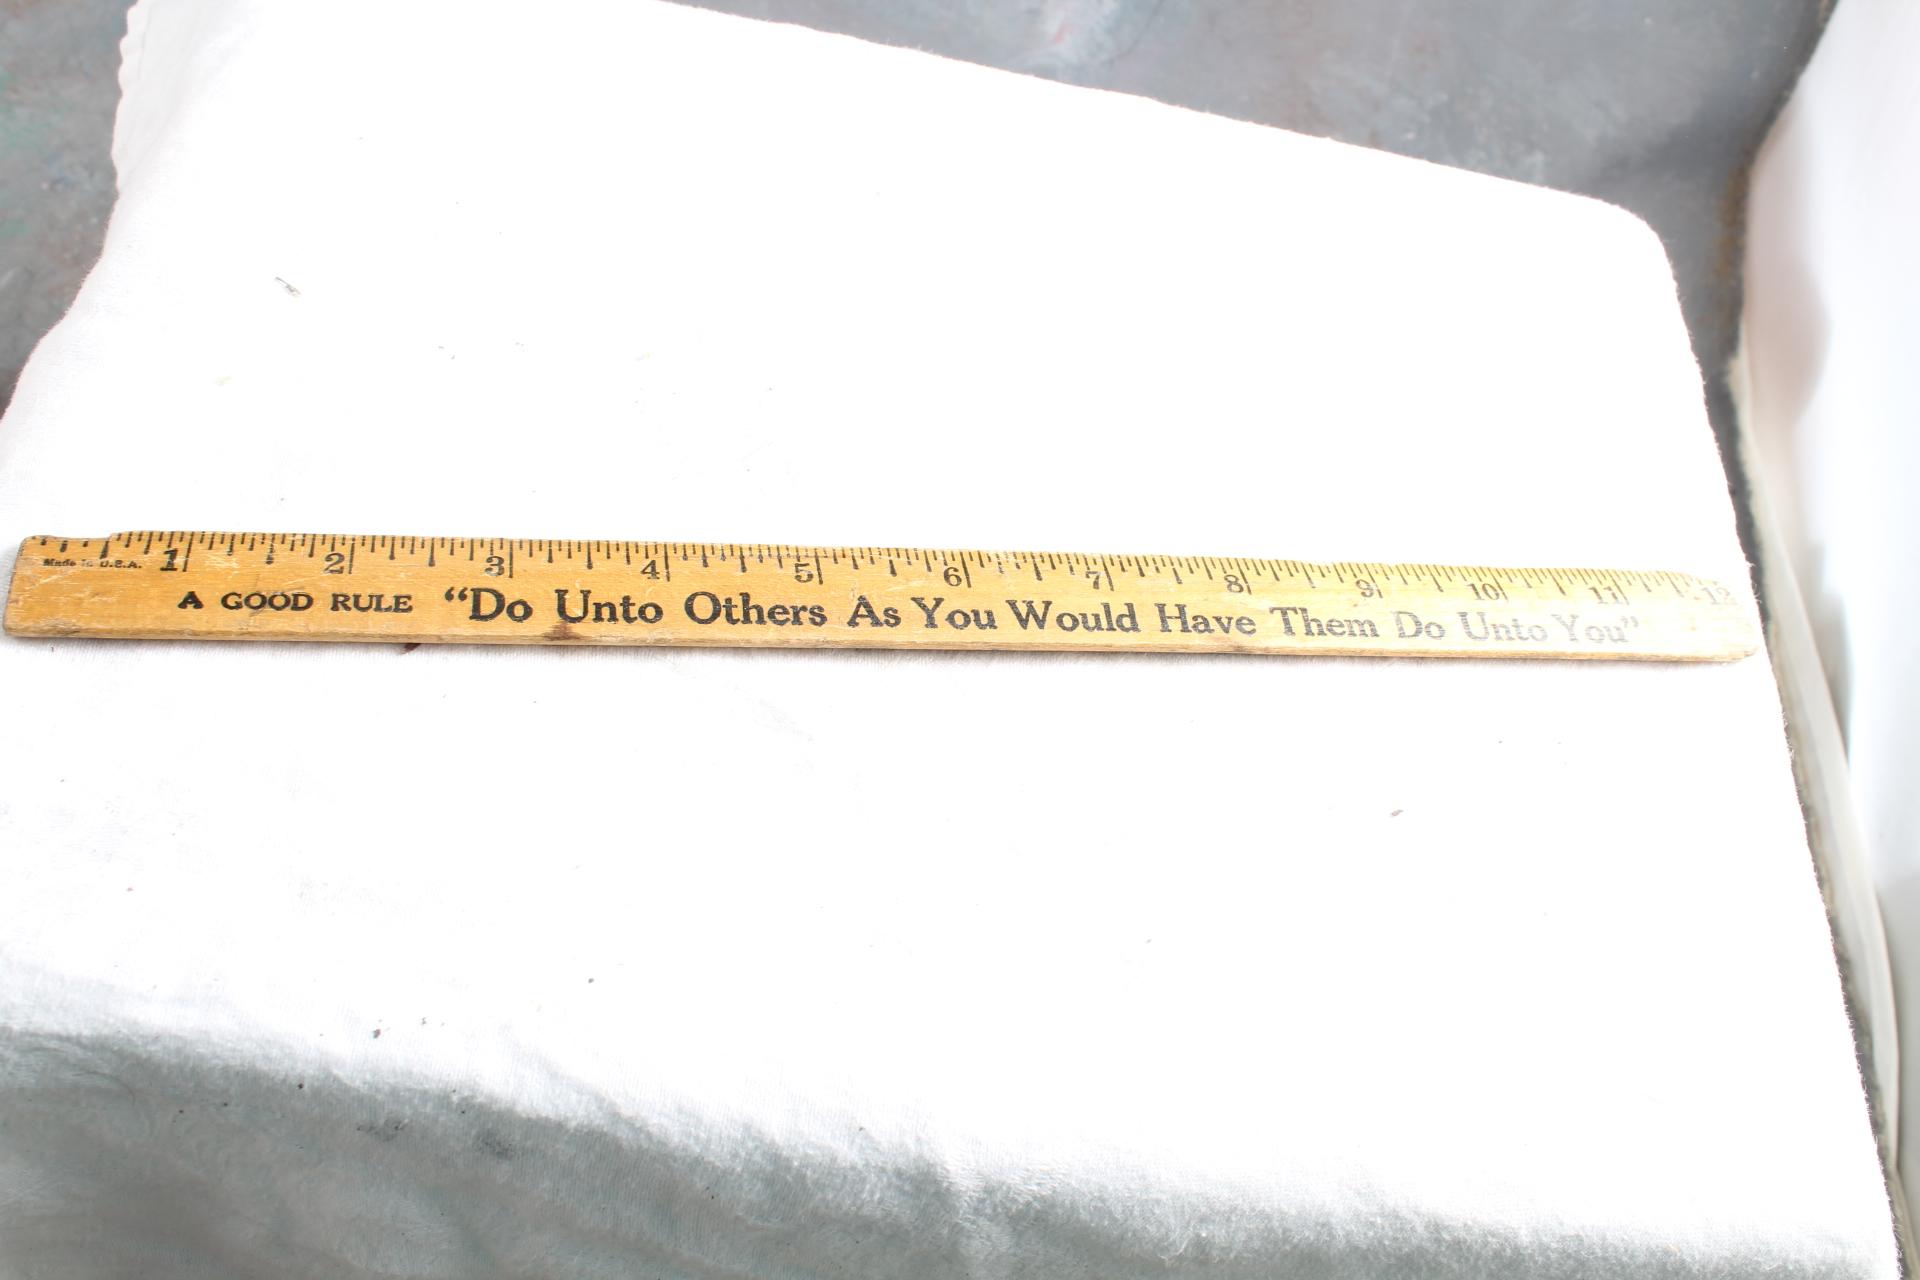 Vintage Coca Cola Wood 12" Advertising Ruler "Do Unto Others As You Would